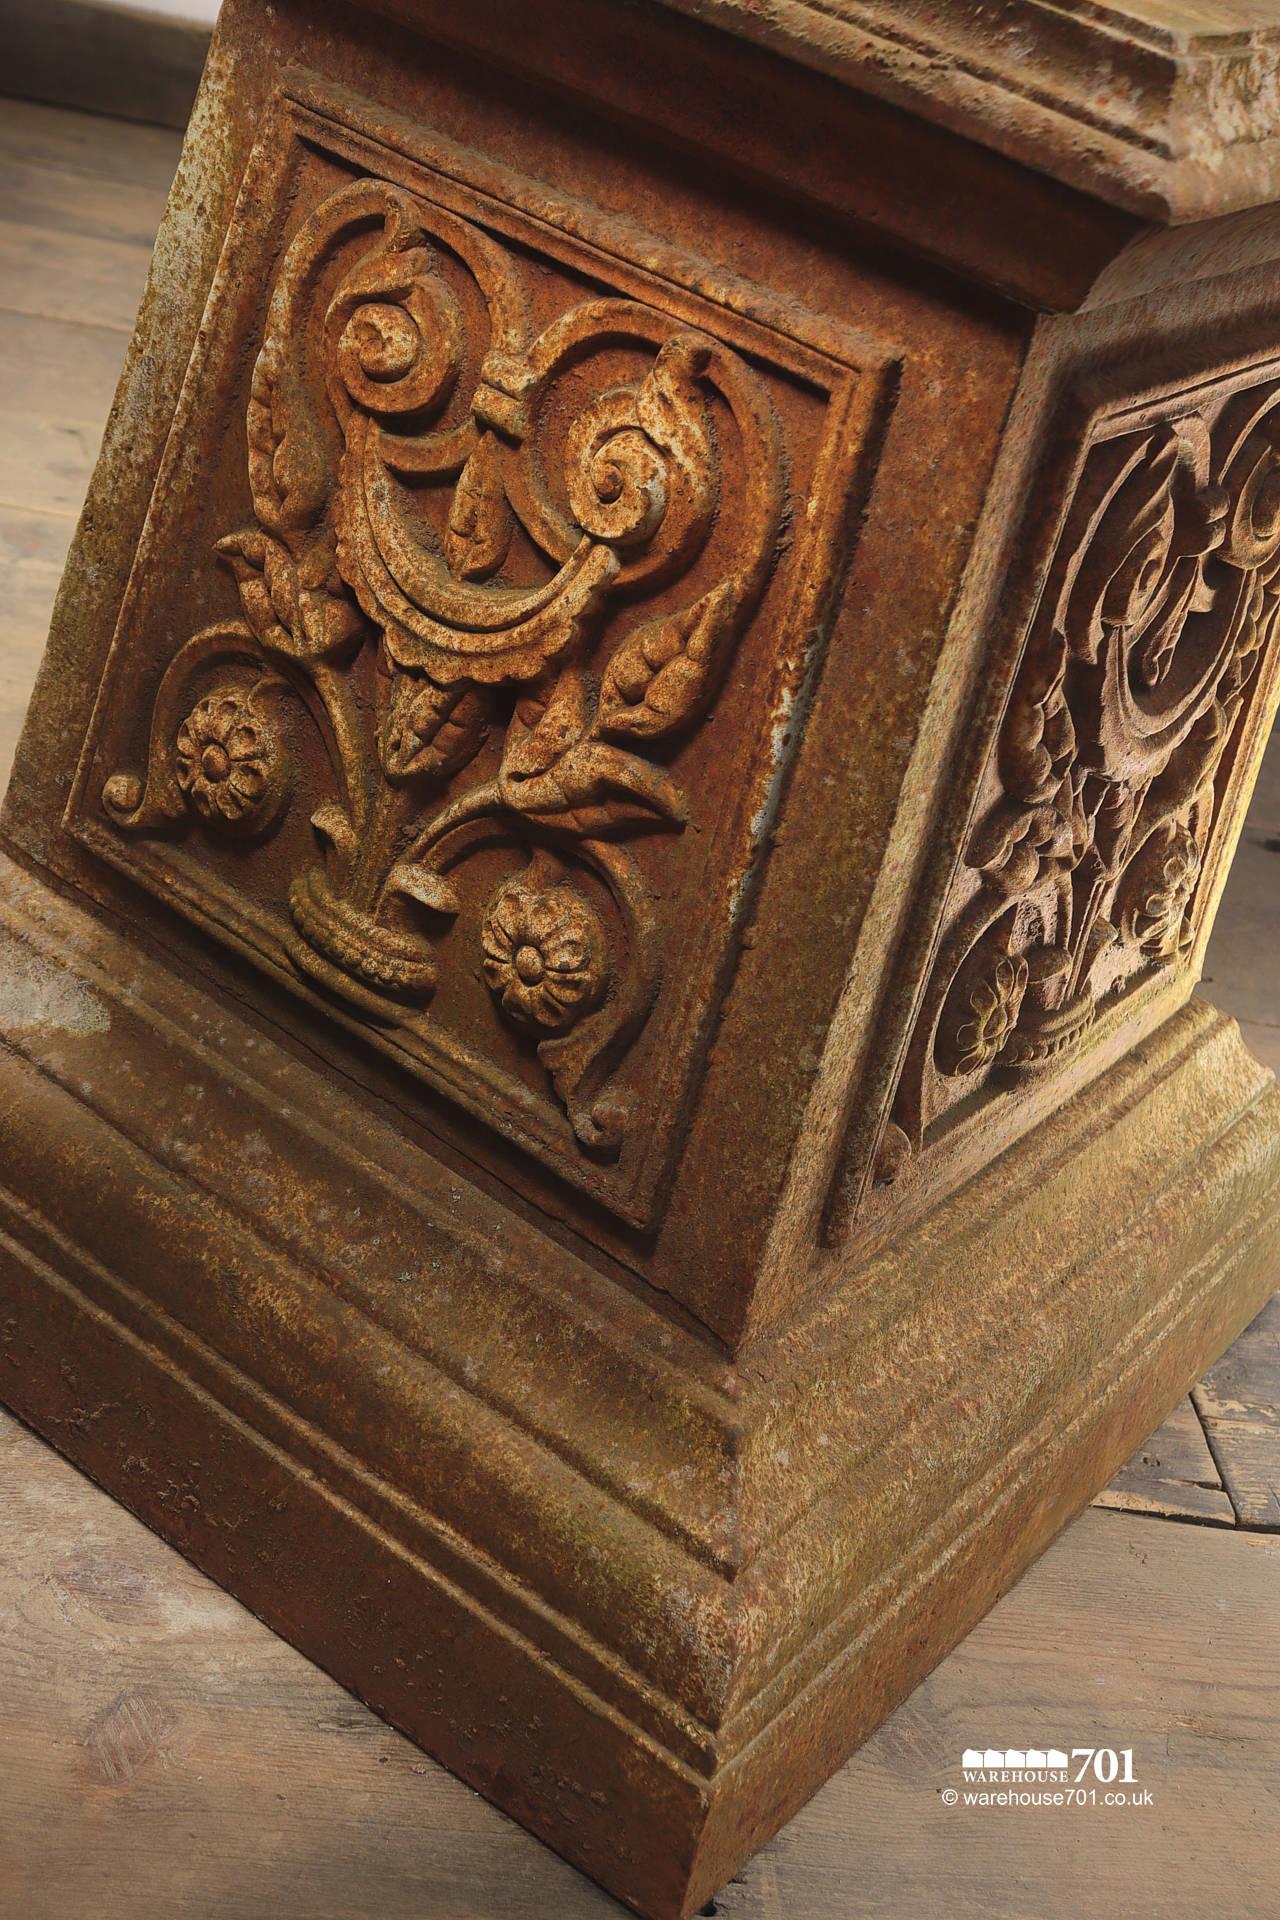 Pair of Aged Cast Iron Urns on Plinths #4